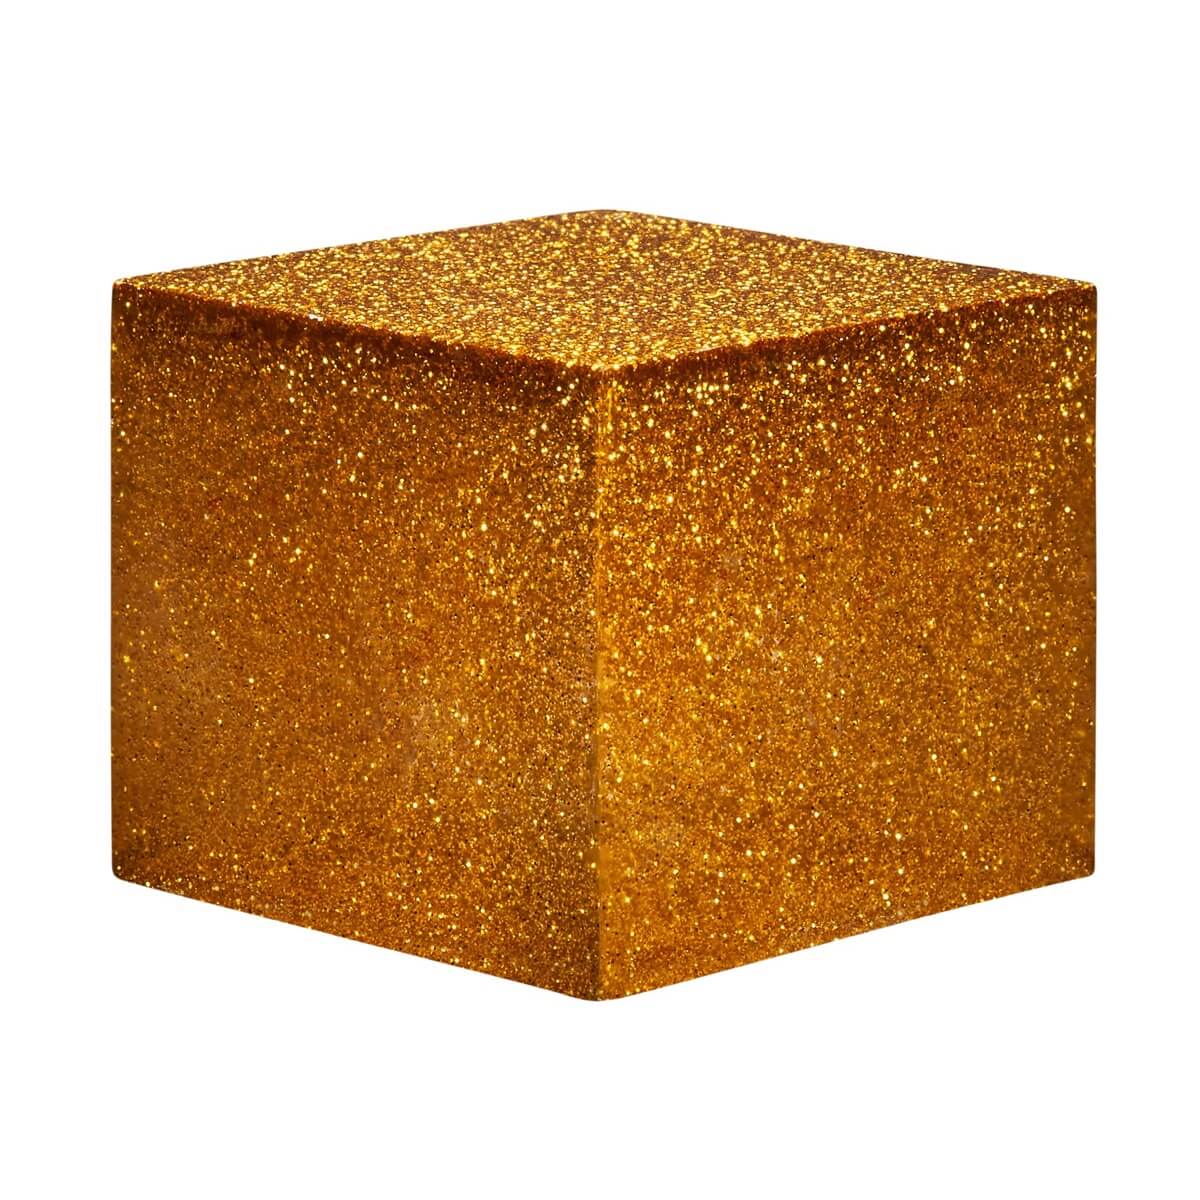 A resin cube made with the Gold Glitter Mica Powder Pigment by Pigmently.